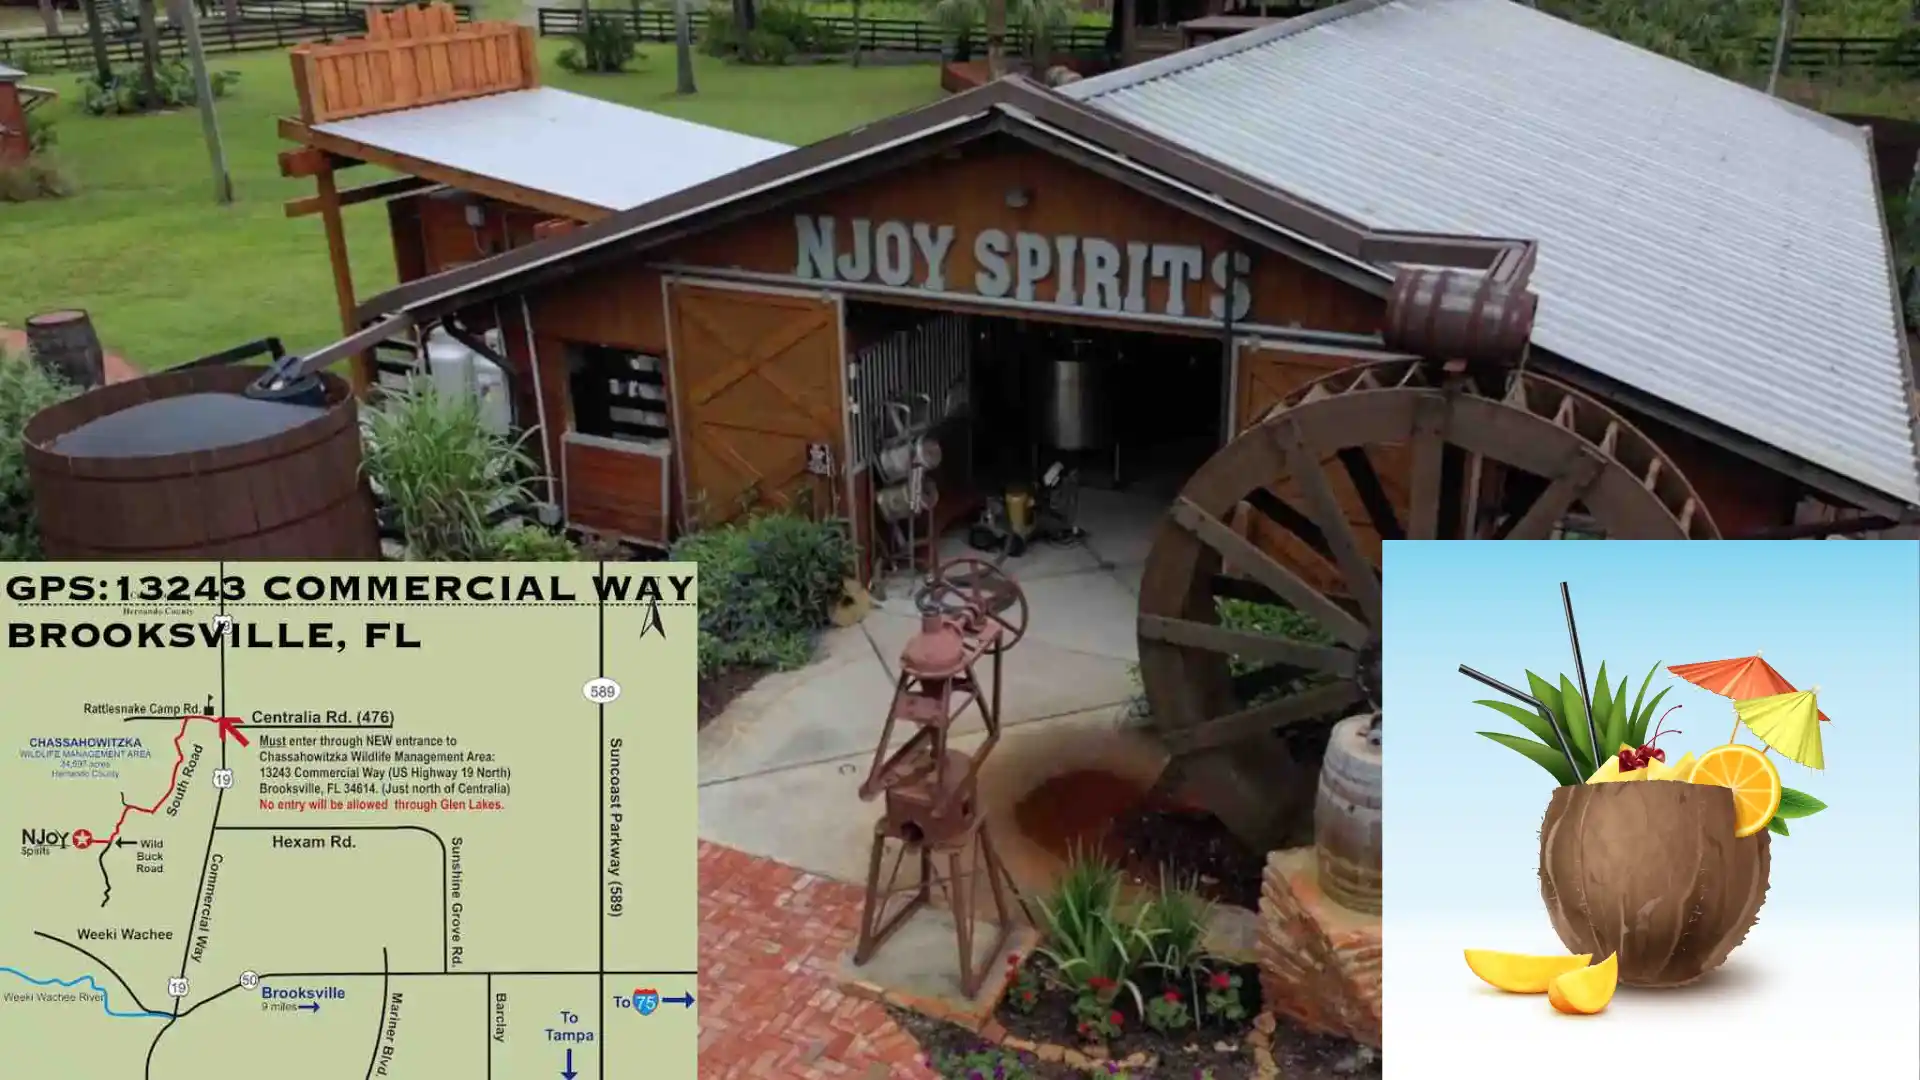 EVENT - 20210904-05 - NJOY DISTILLERY BARN ARIAL + MAP + NATIONAL LABOR & COCONUT DAY WEEKEND